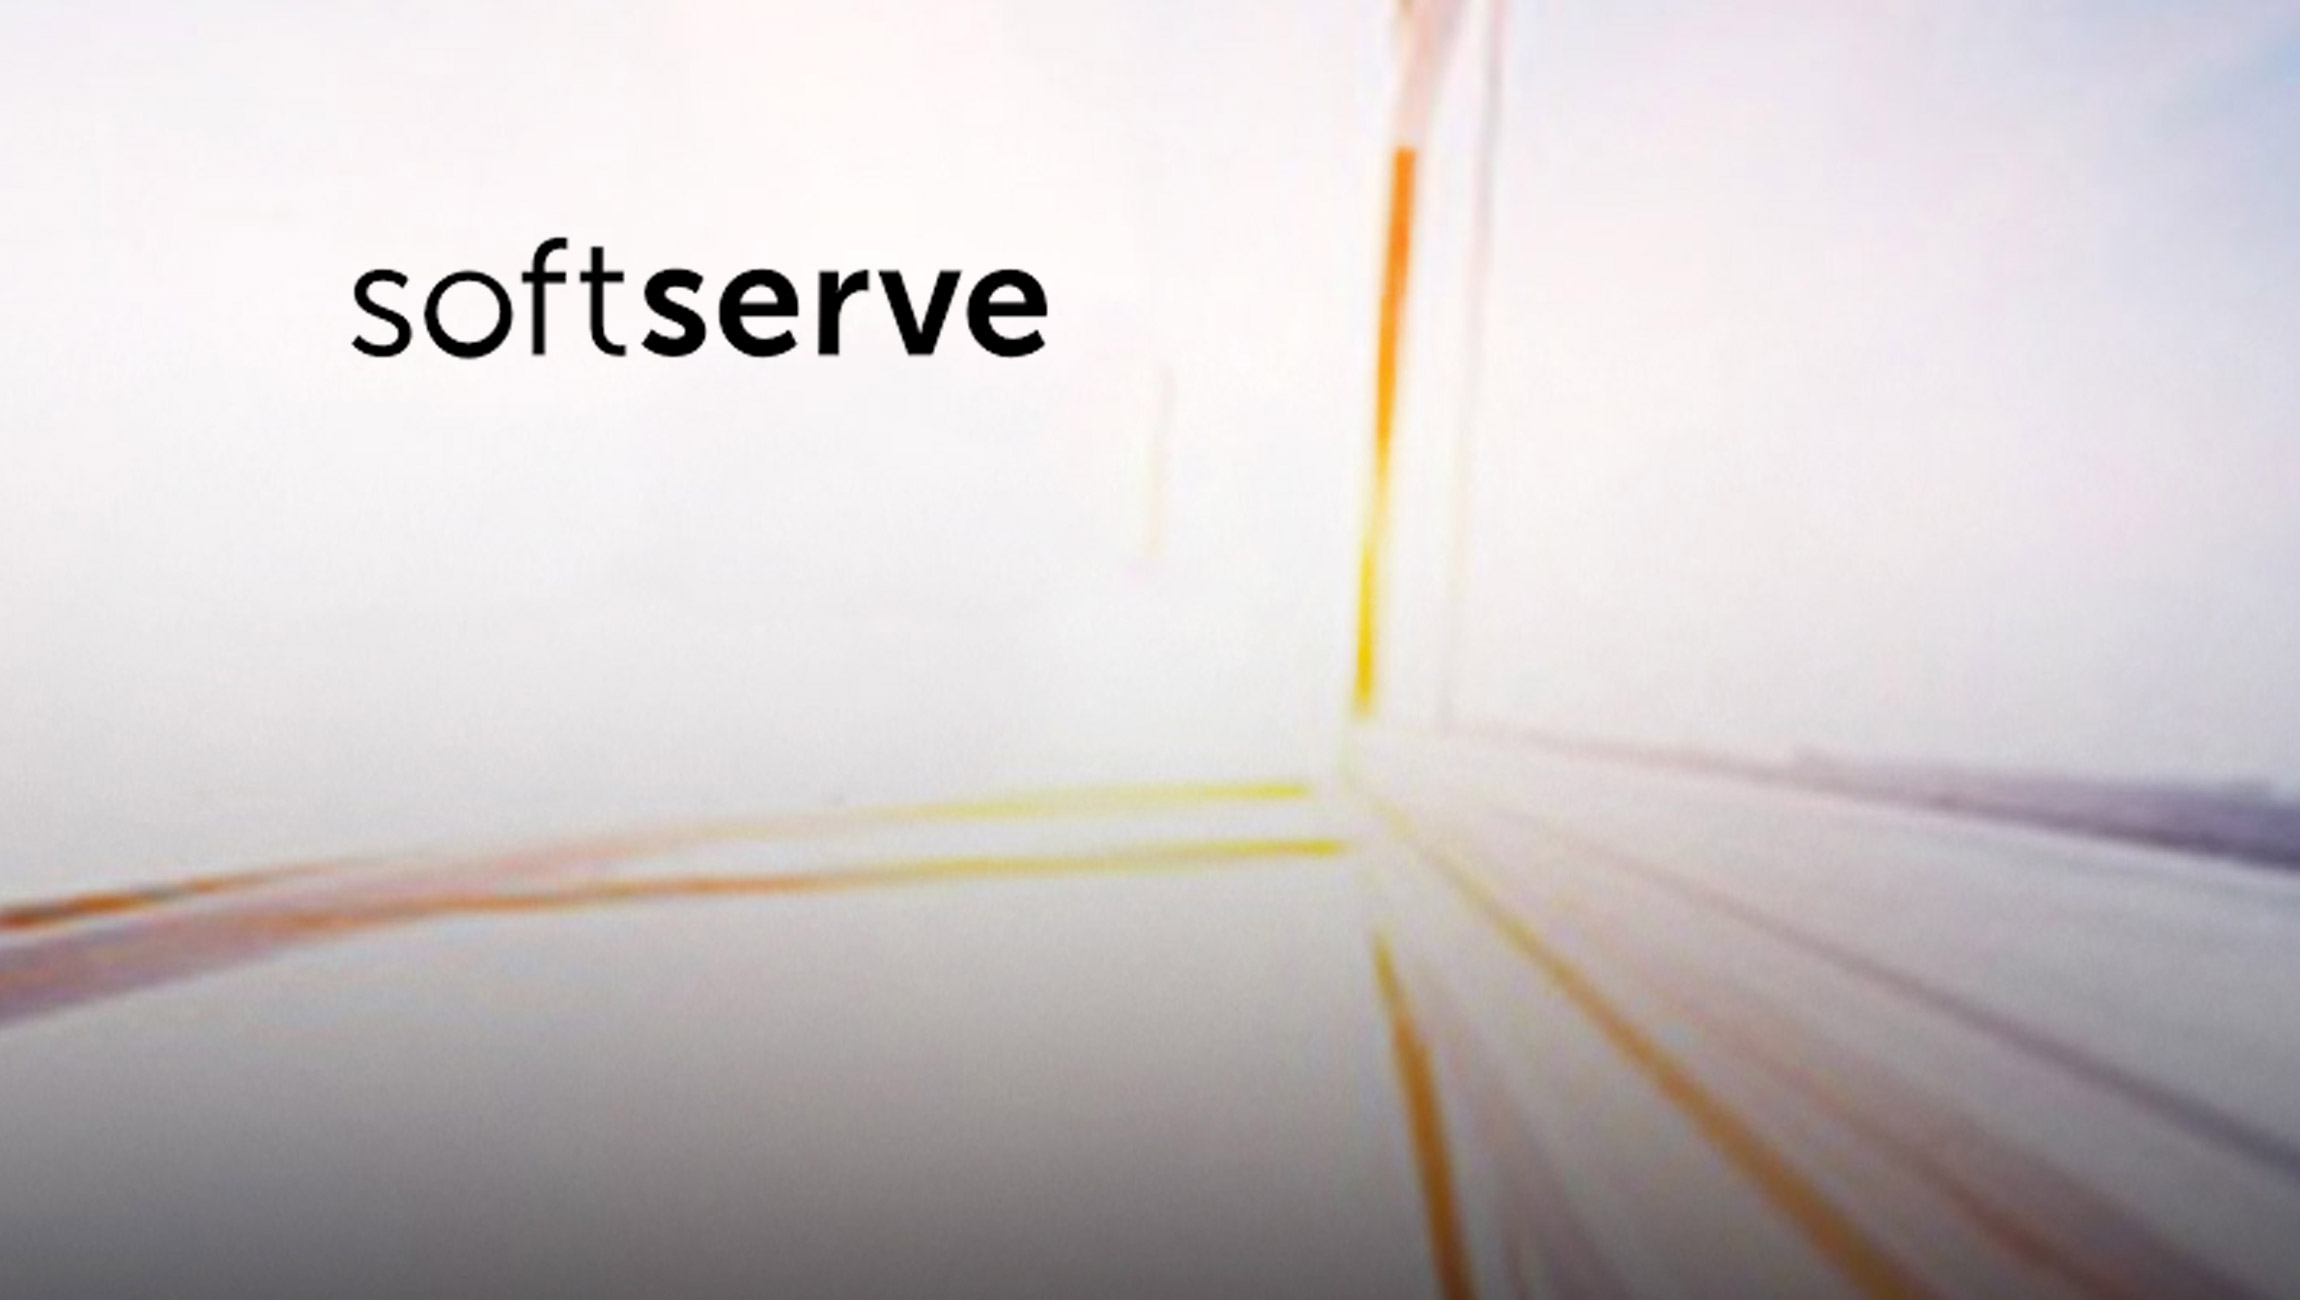 SoftServe Recognized for Driving Enterprises Through Digital Transformation to Industry 4.0 by Everest Group